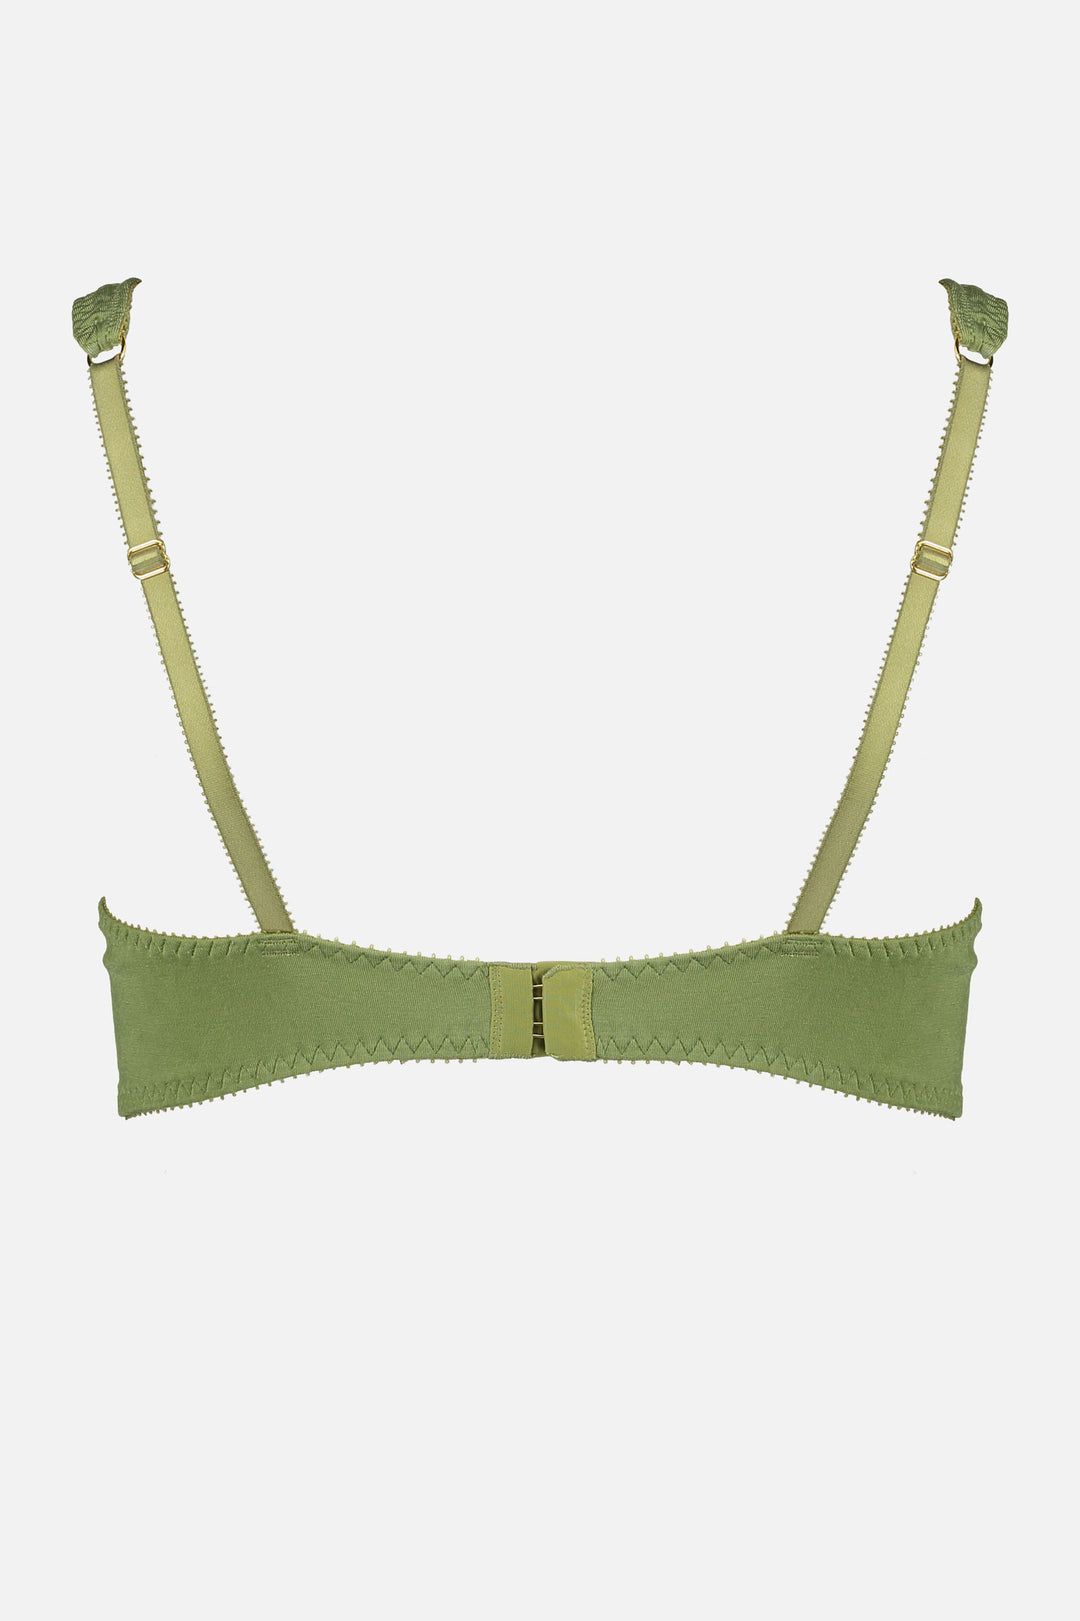 Videris Lingerie Sarah underwire free soft cup bra in olive TENCEL™ features adjustable back straps and hook and eyes closure